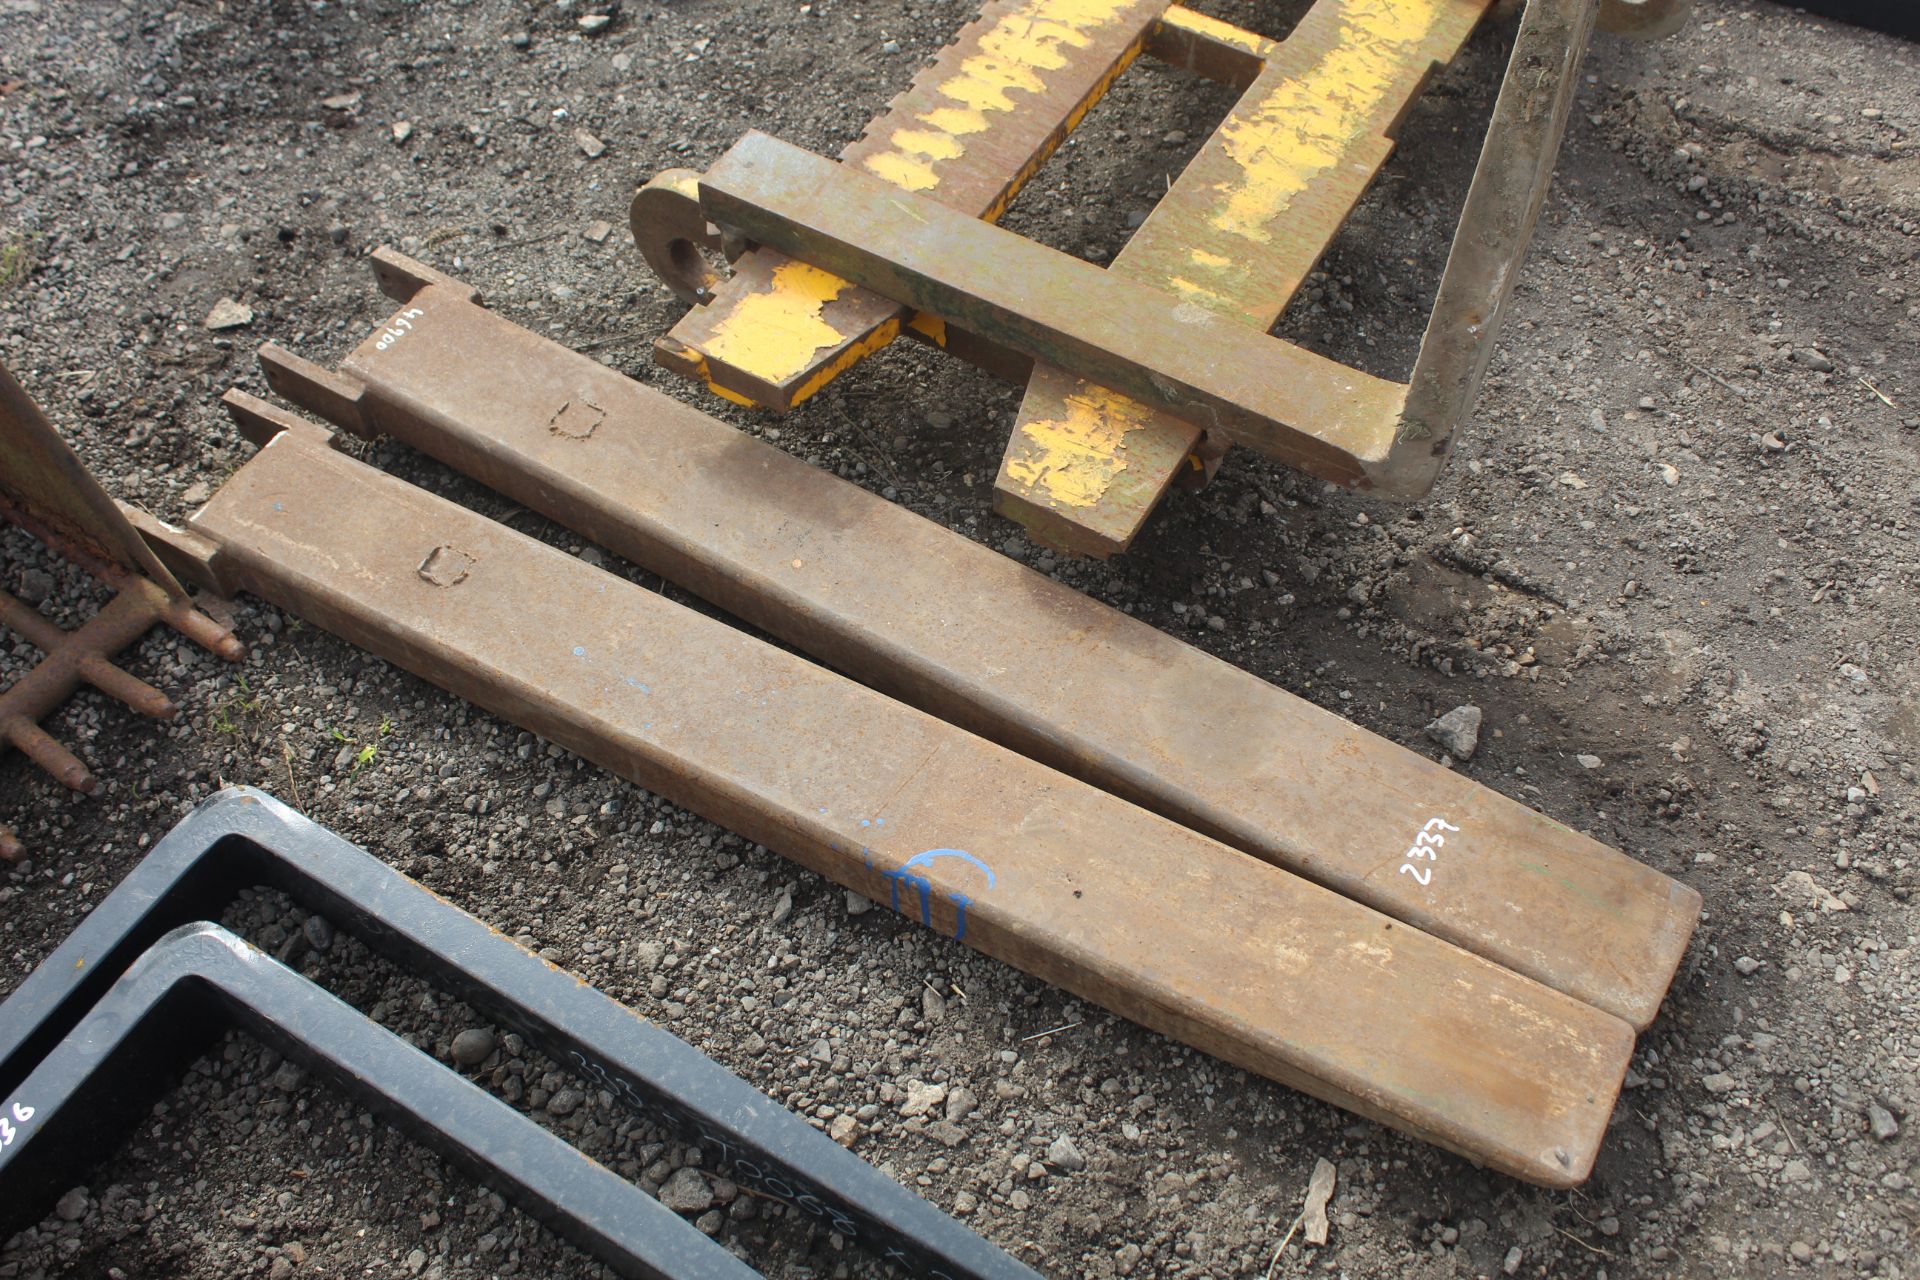 Forklift extension tines.